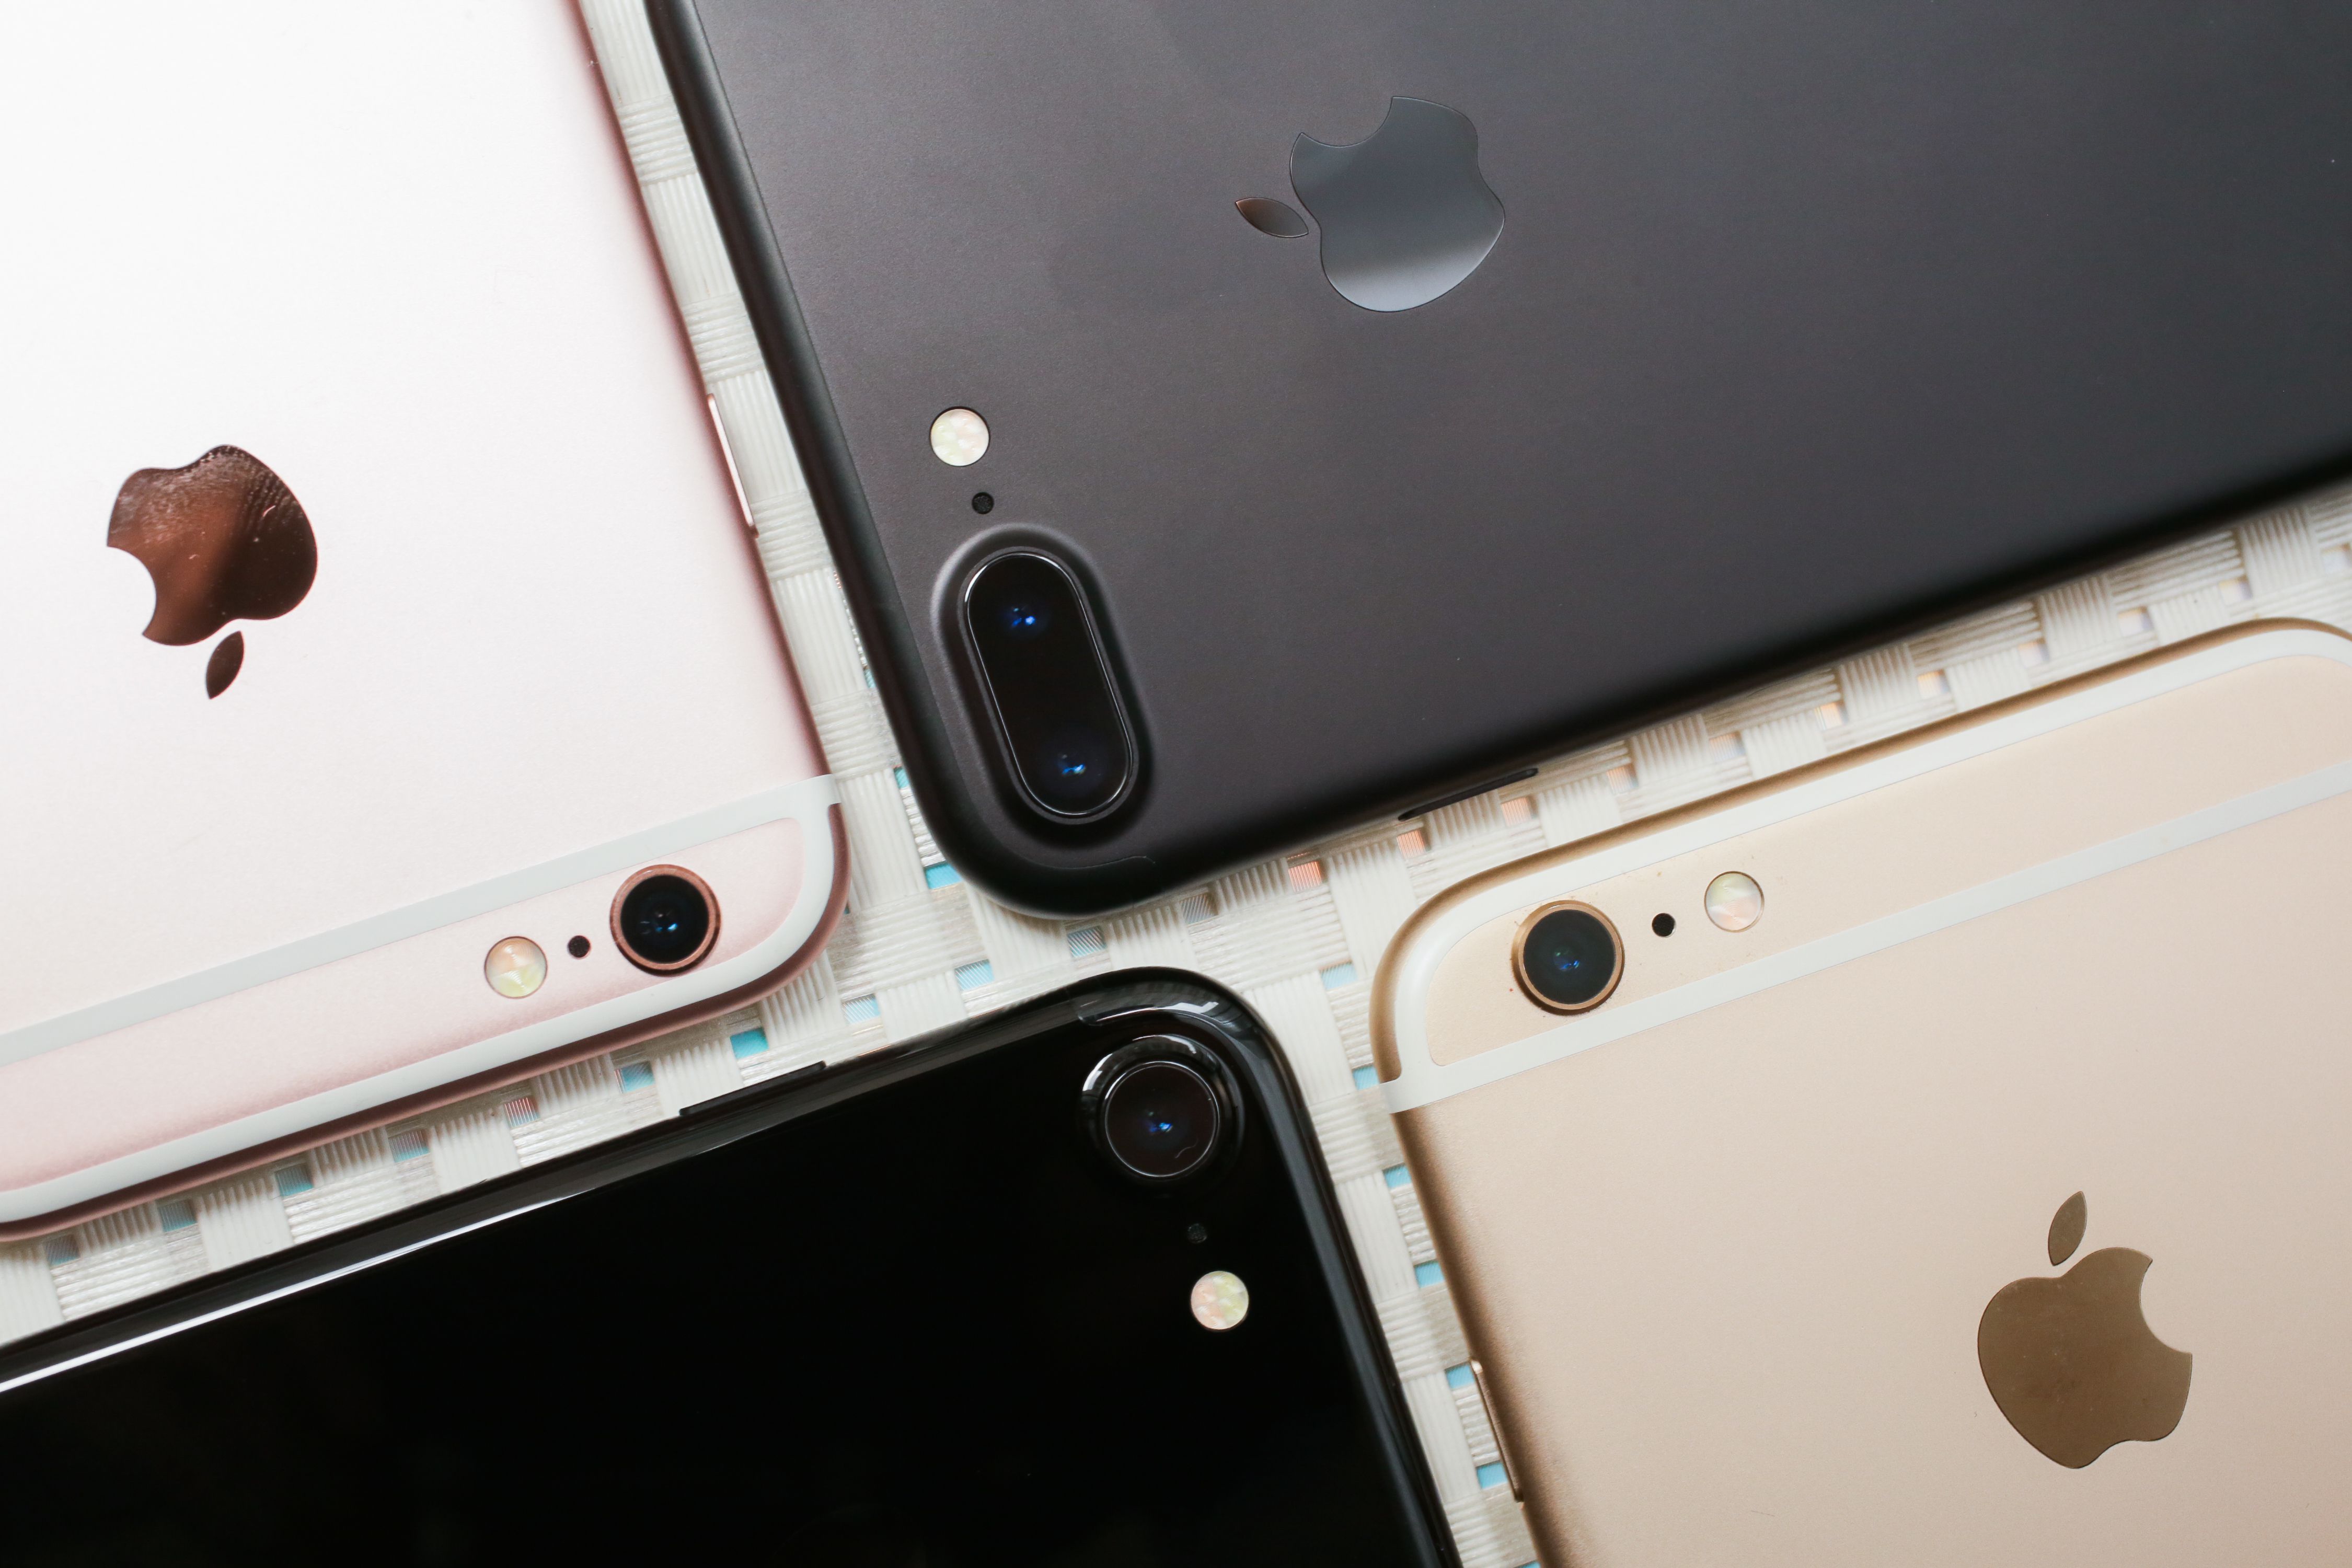 Chinese Company Says It'll Fire Anyone Who Buys iPhone 7